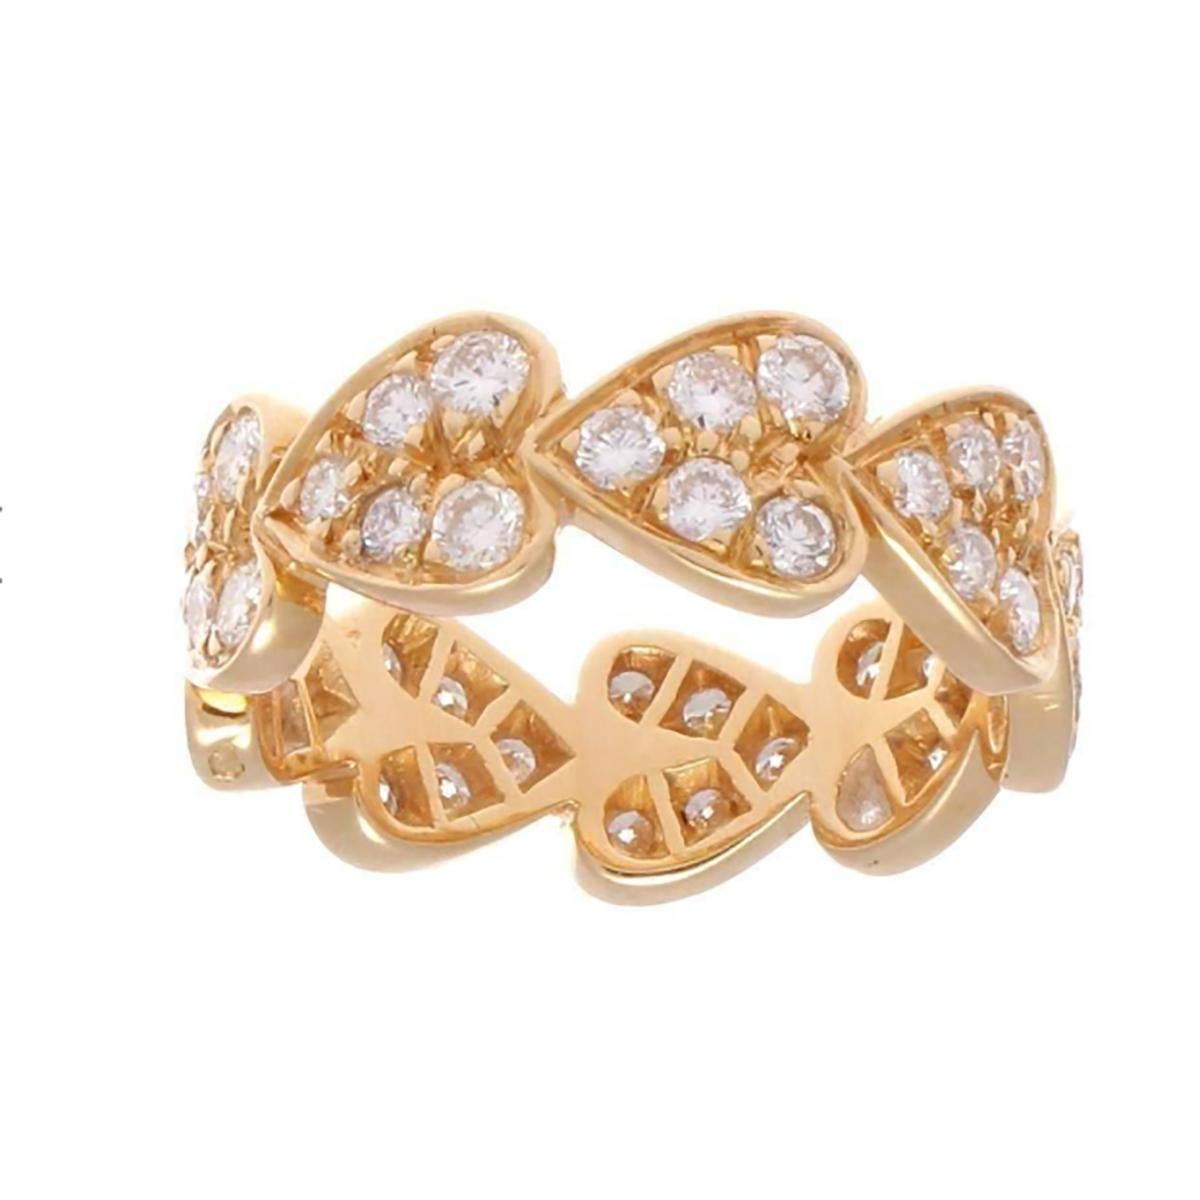 Carier 18k Yellow Gold Heart Eternity Band. Total weight of diamonds  approximately 1.45 carat, Color F, Clarity VVS